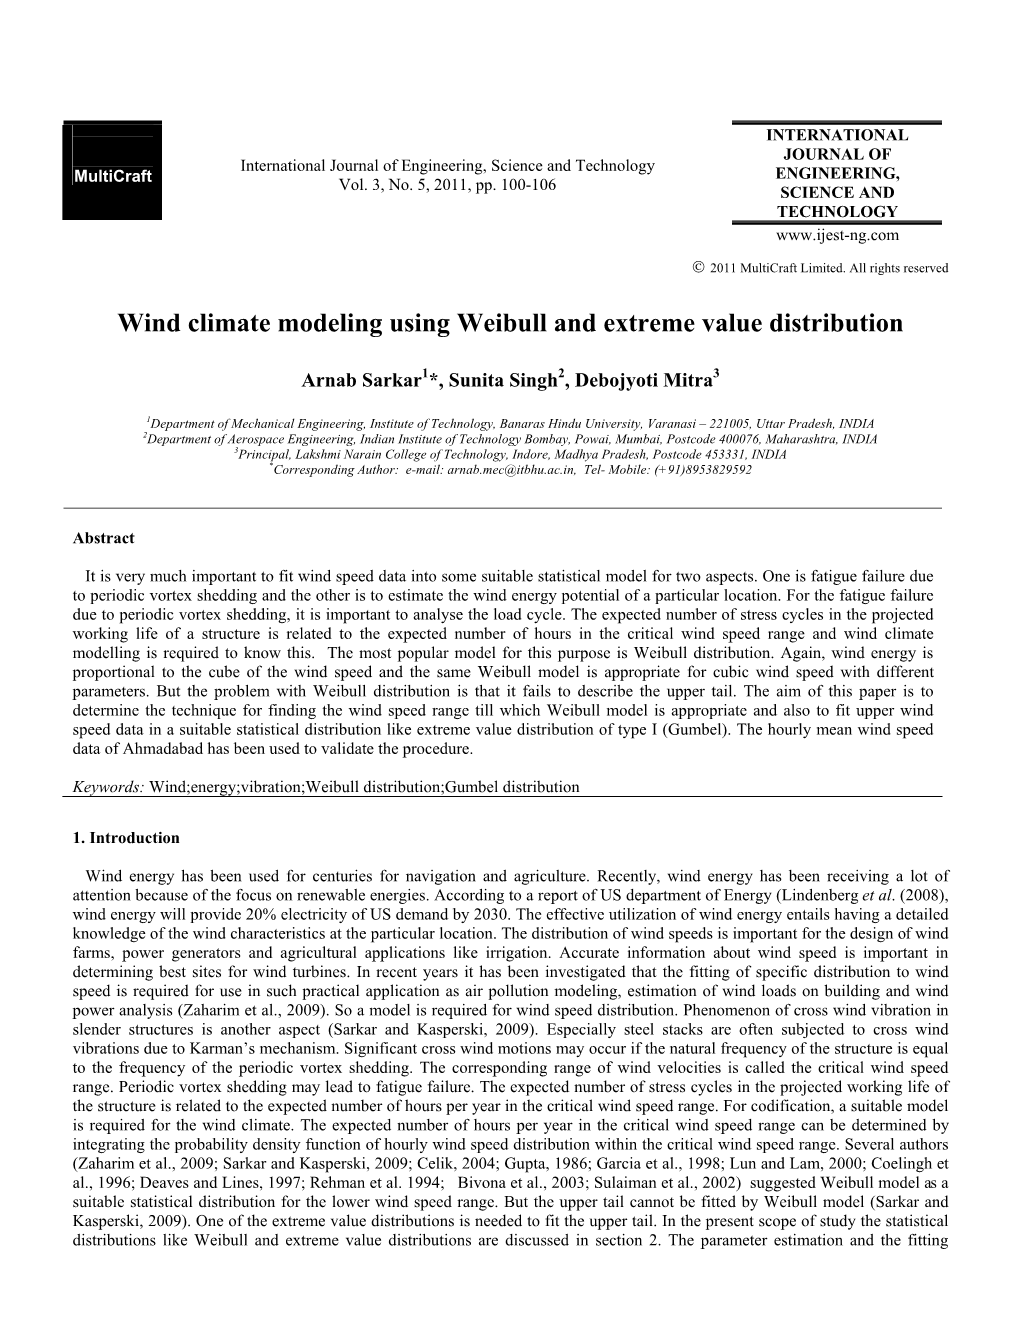 Wind Climate Modeling Using Weibull and Extreme Value Distribution